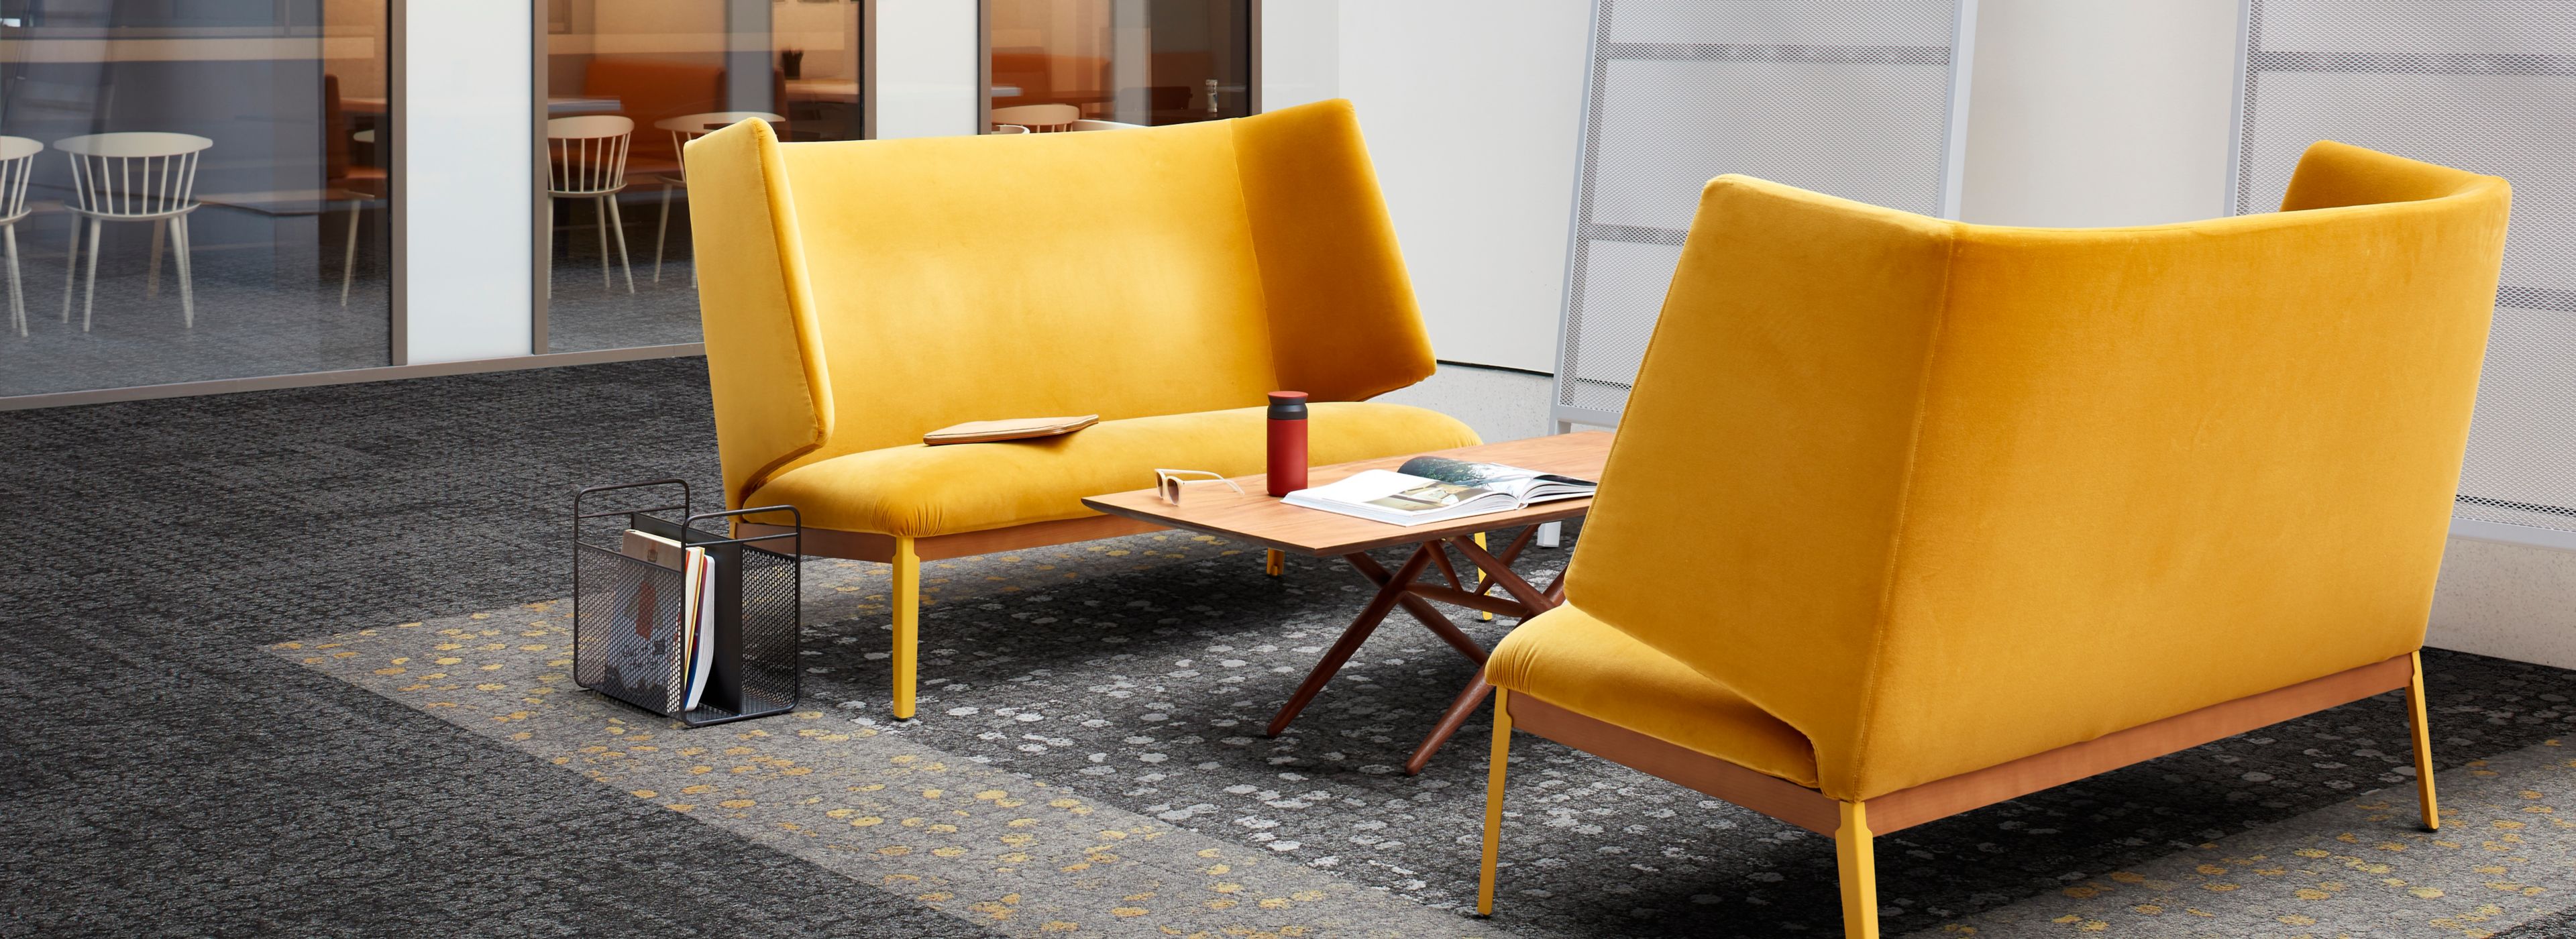 Interface Mercer Street and Broome Street carpet tile in seating area with two yellow couches afbeeldingnummer 1